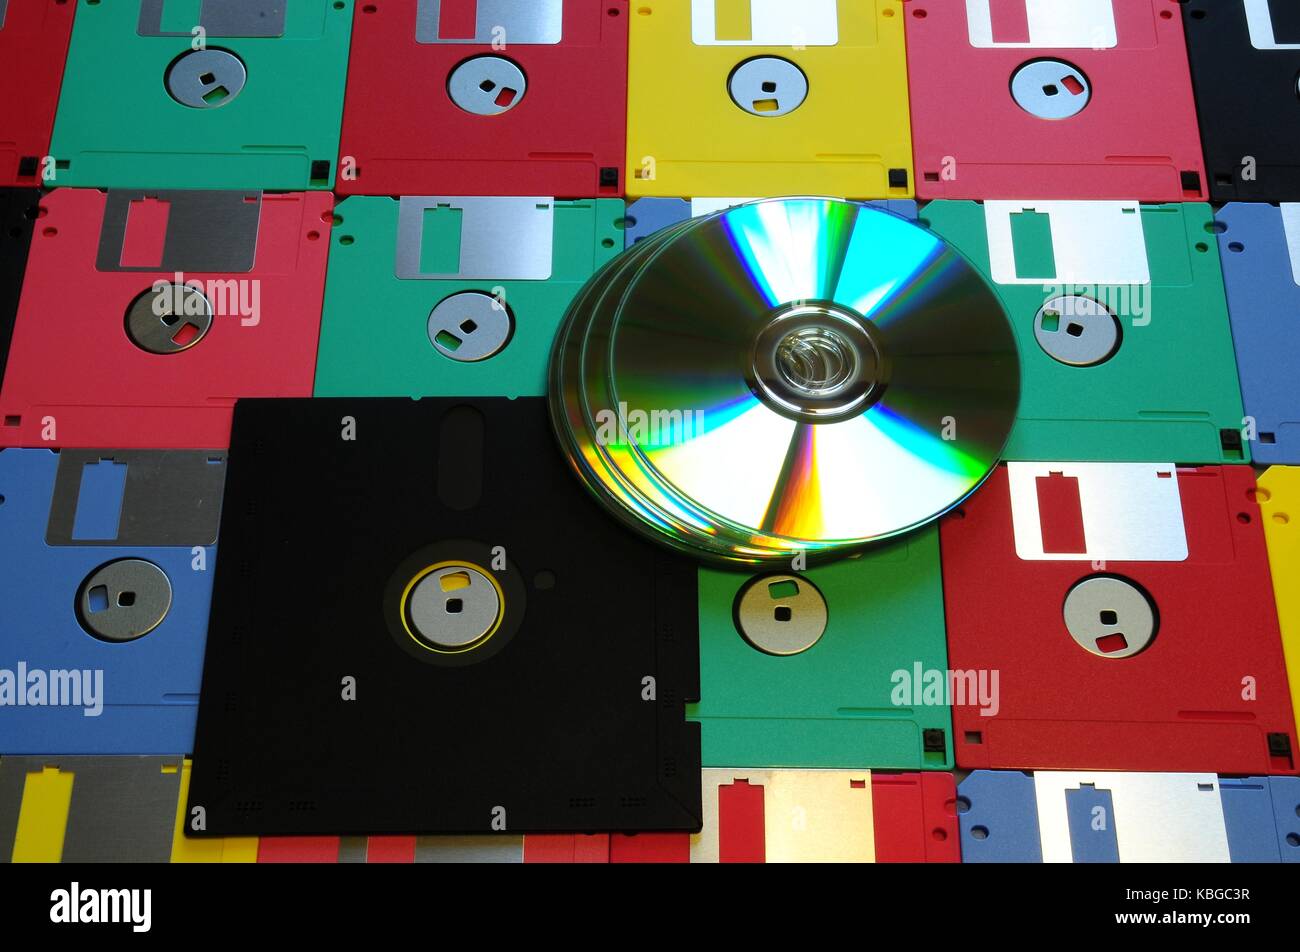 Old diskette 5 25 inches with 3.5 floppy disks of various colors with modern DVD. Background Stock Photo